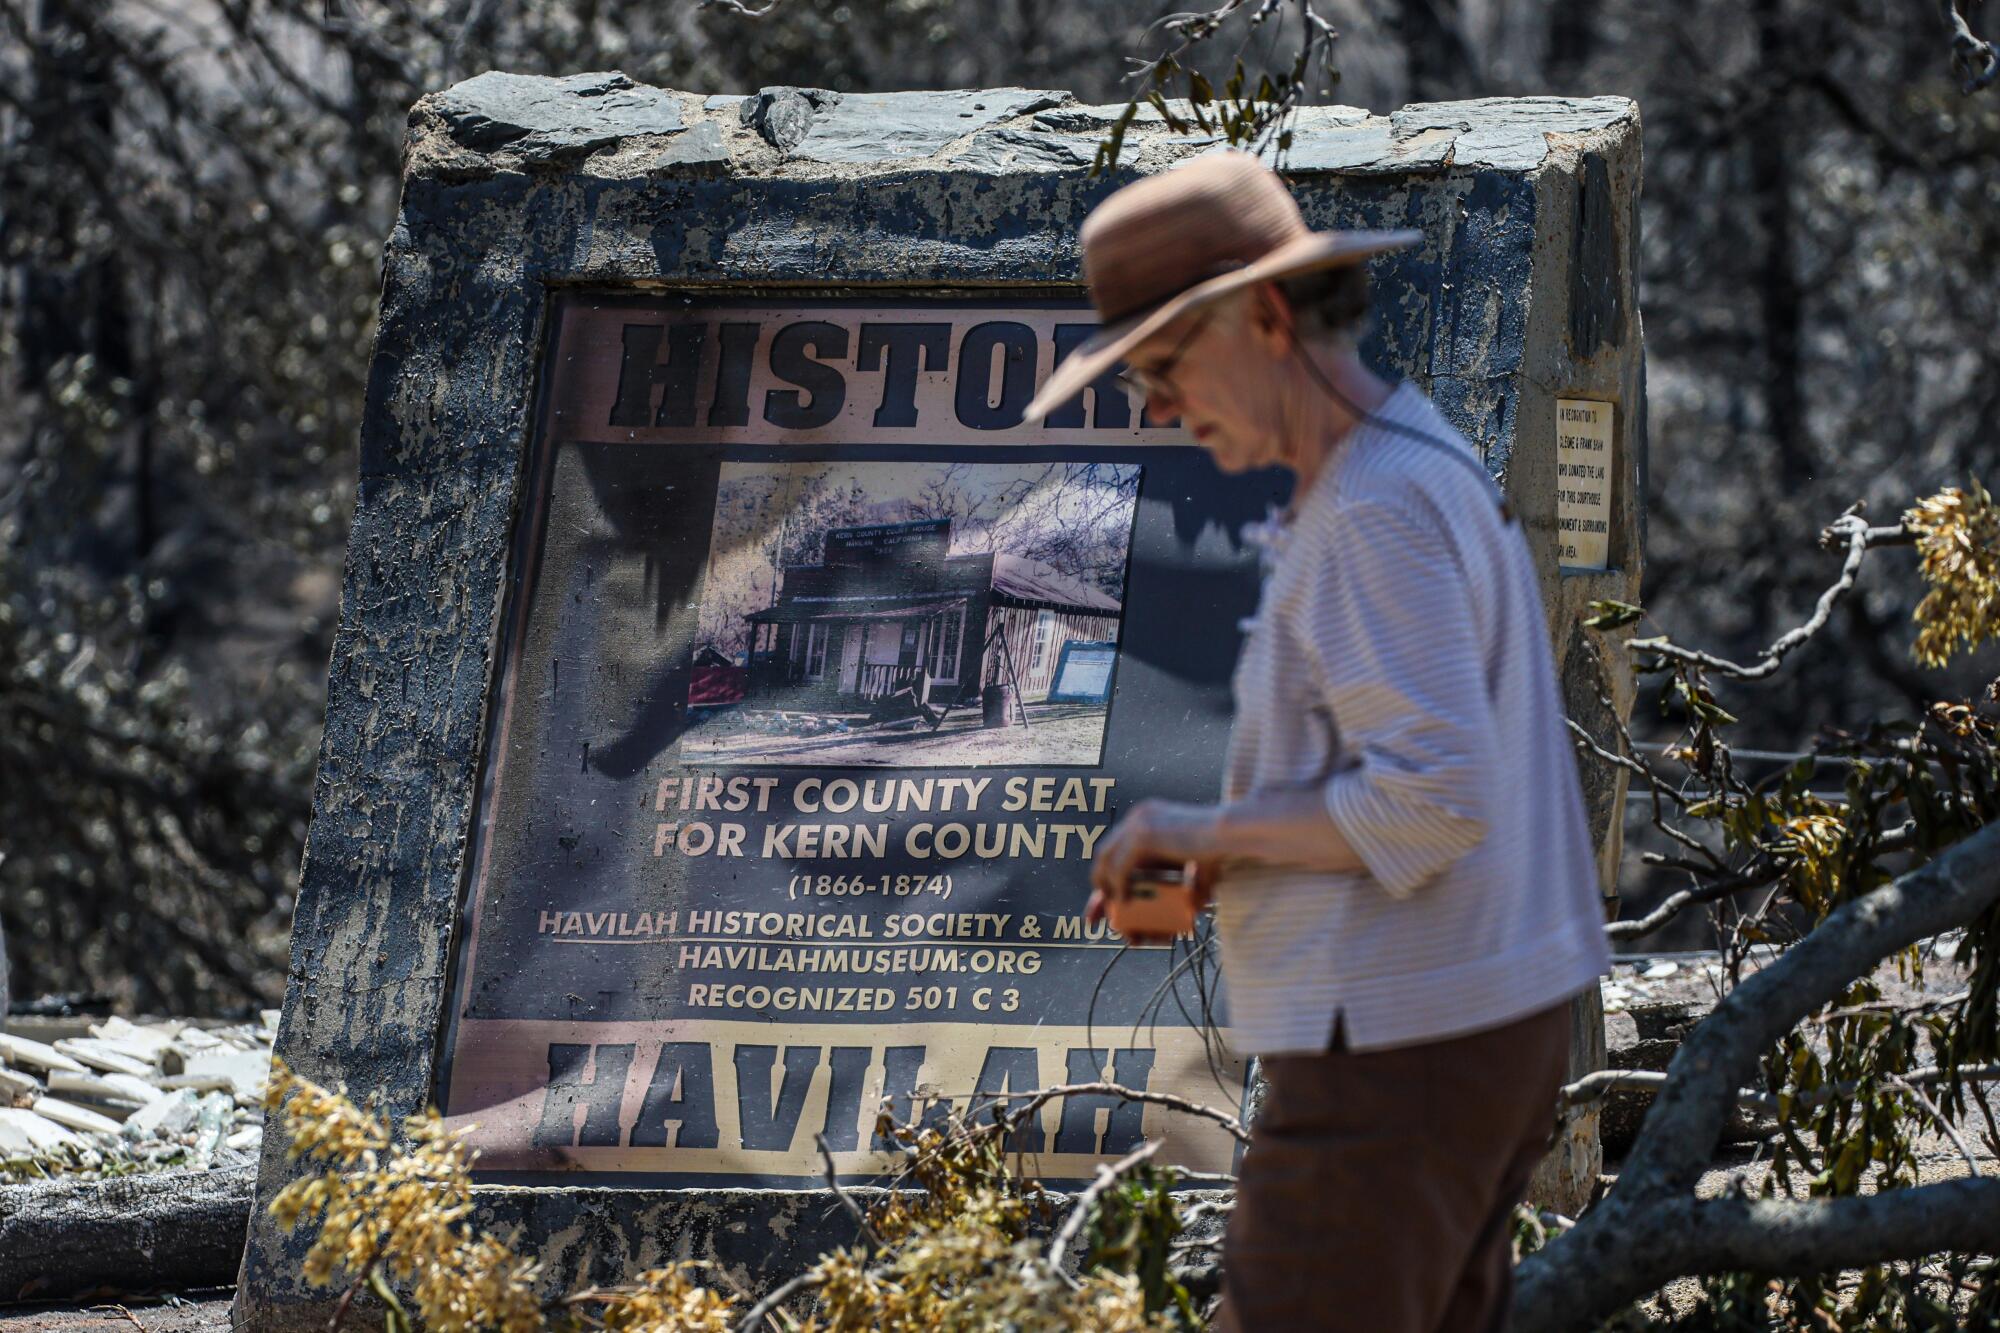 A Havilah resident wearing a sun hat passes a charred sign for the Havilah museum. 